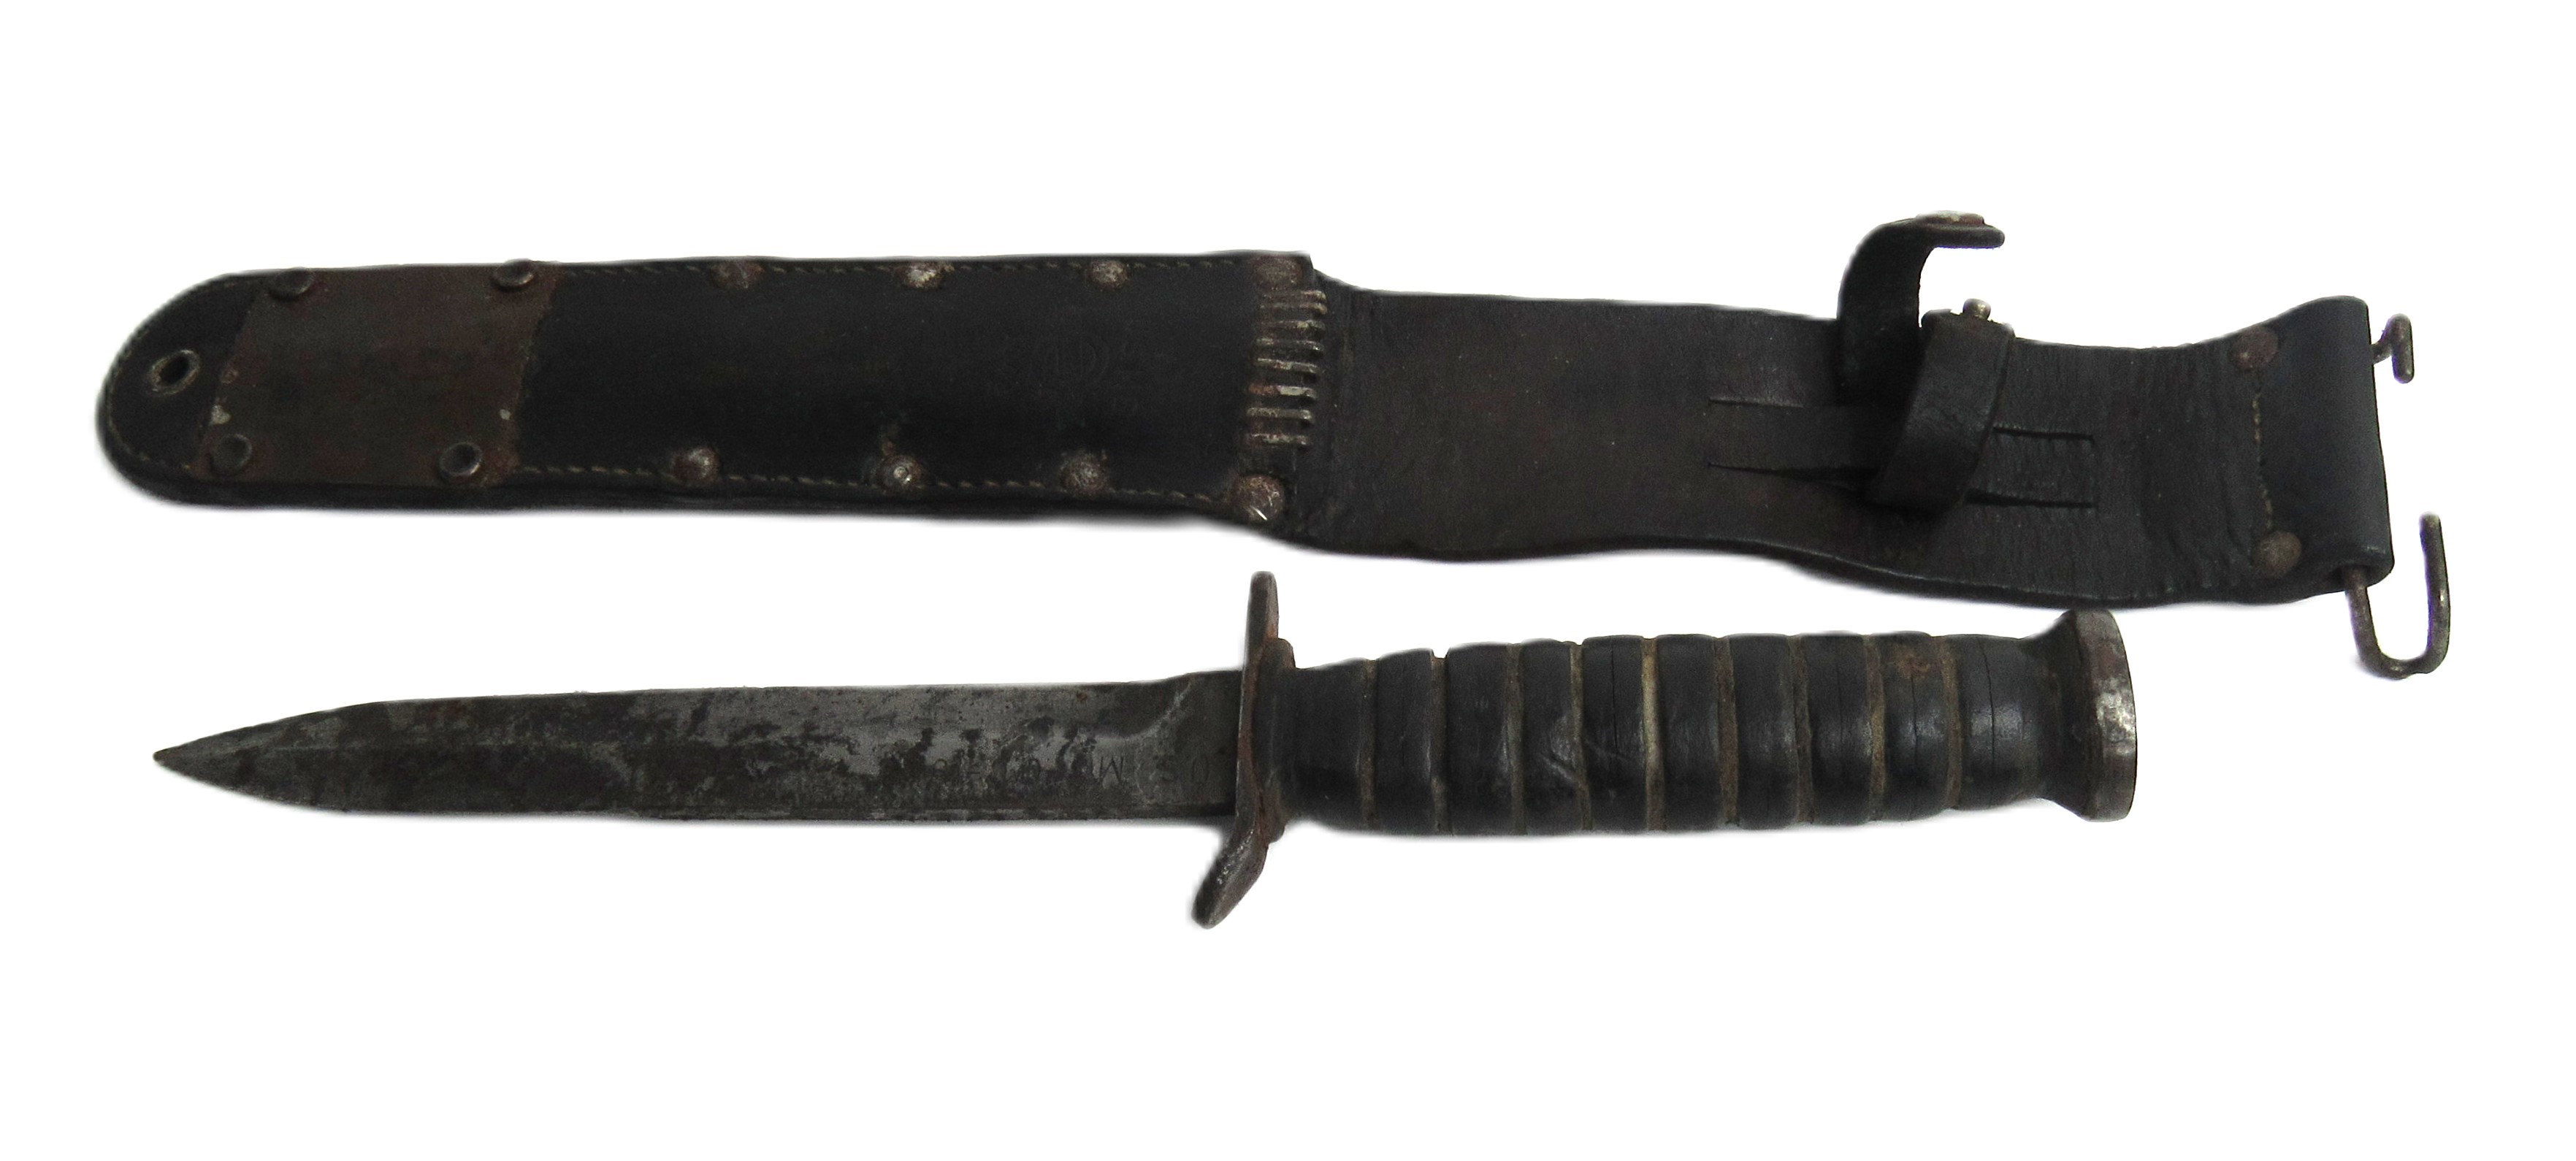 Militaria: A Rare World War II Army Issue 'U.S. Marines' Dagger, with pointed blade, inscribed, in